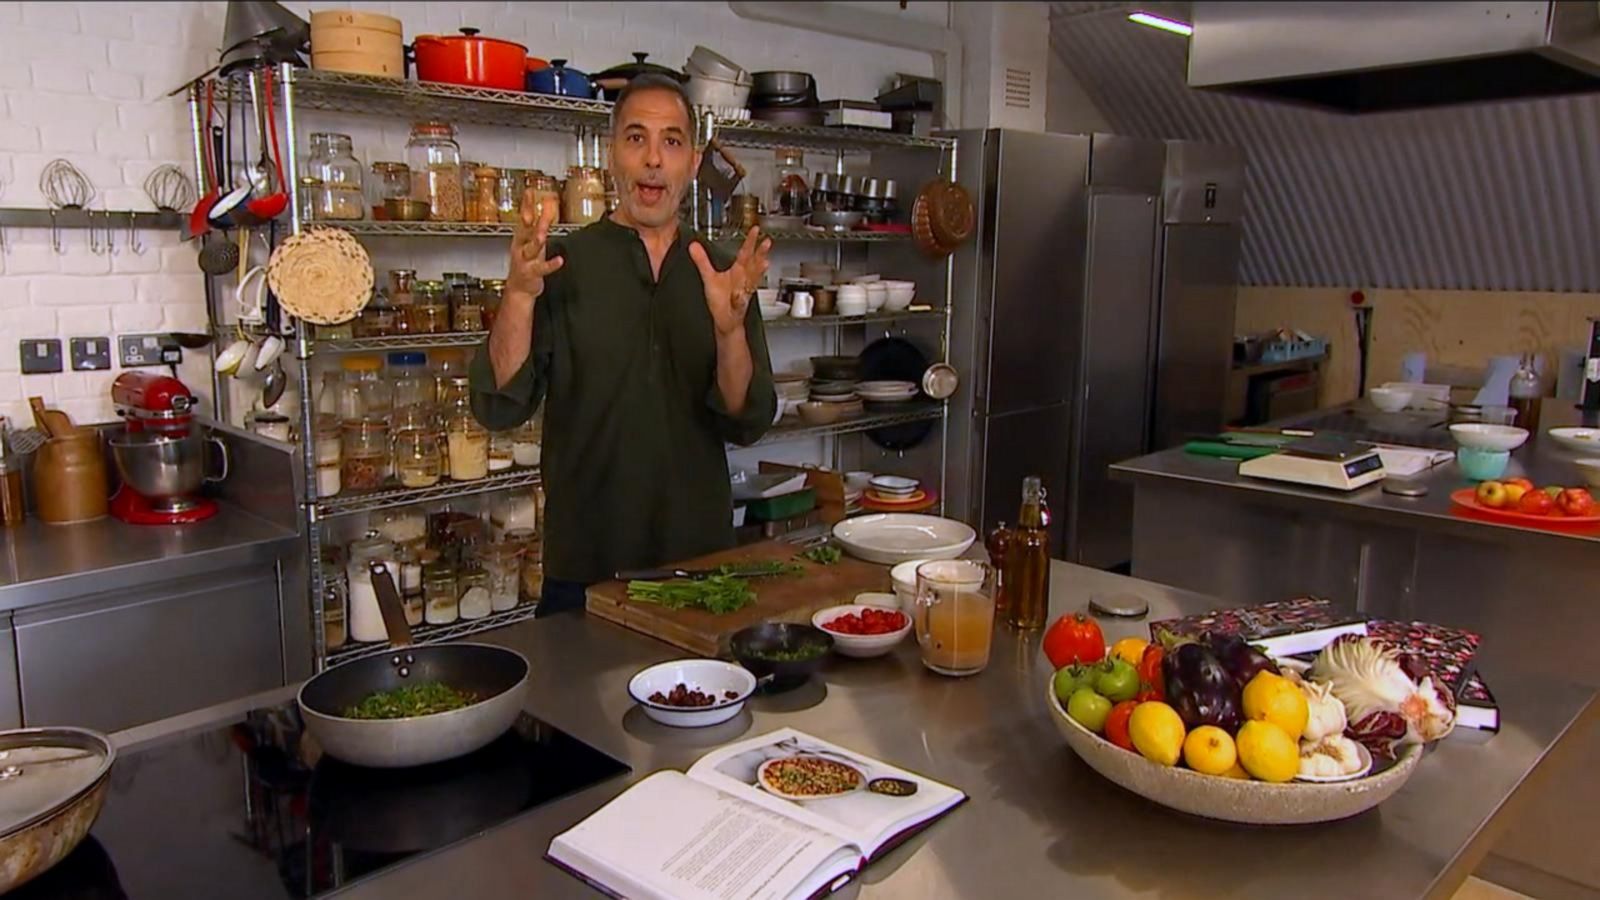 Chef Yotam Ottolenghi shares 2 flavorful recipes for classic pasta